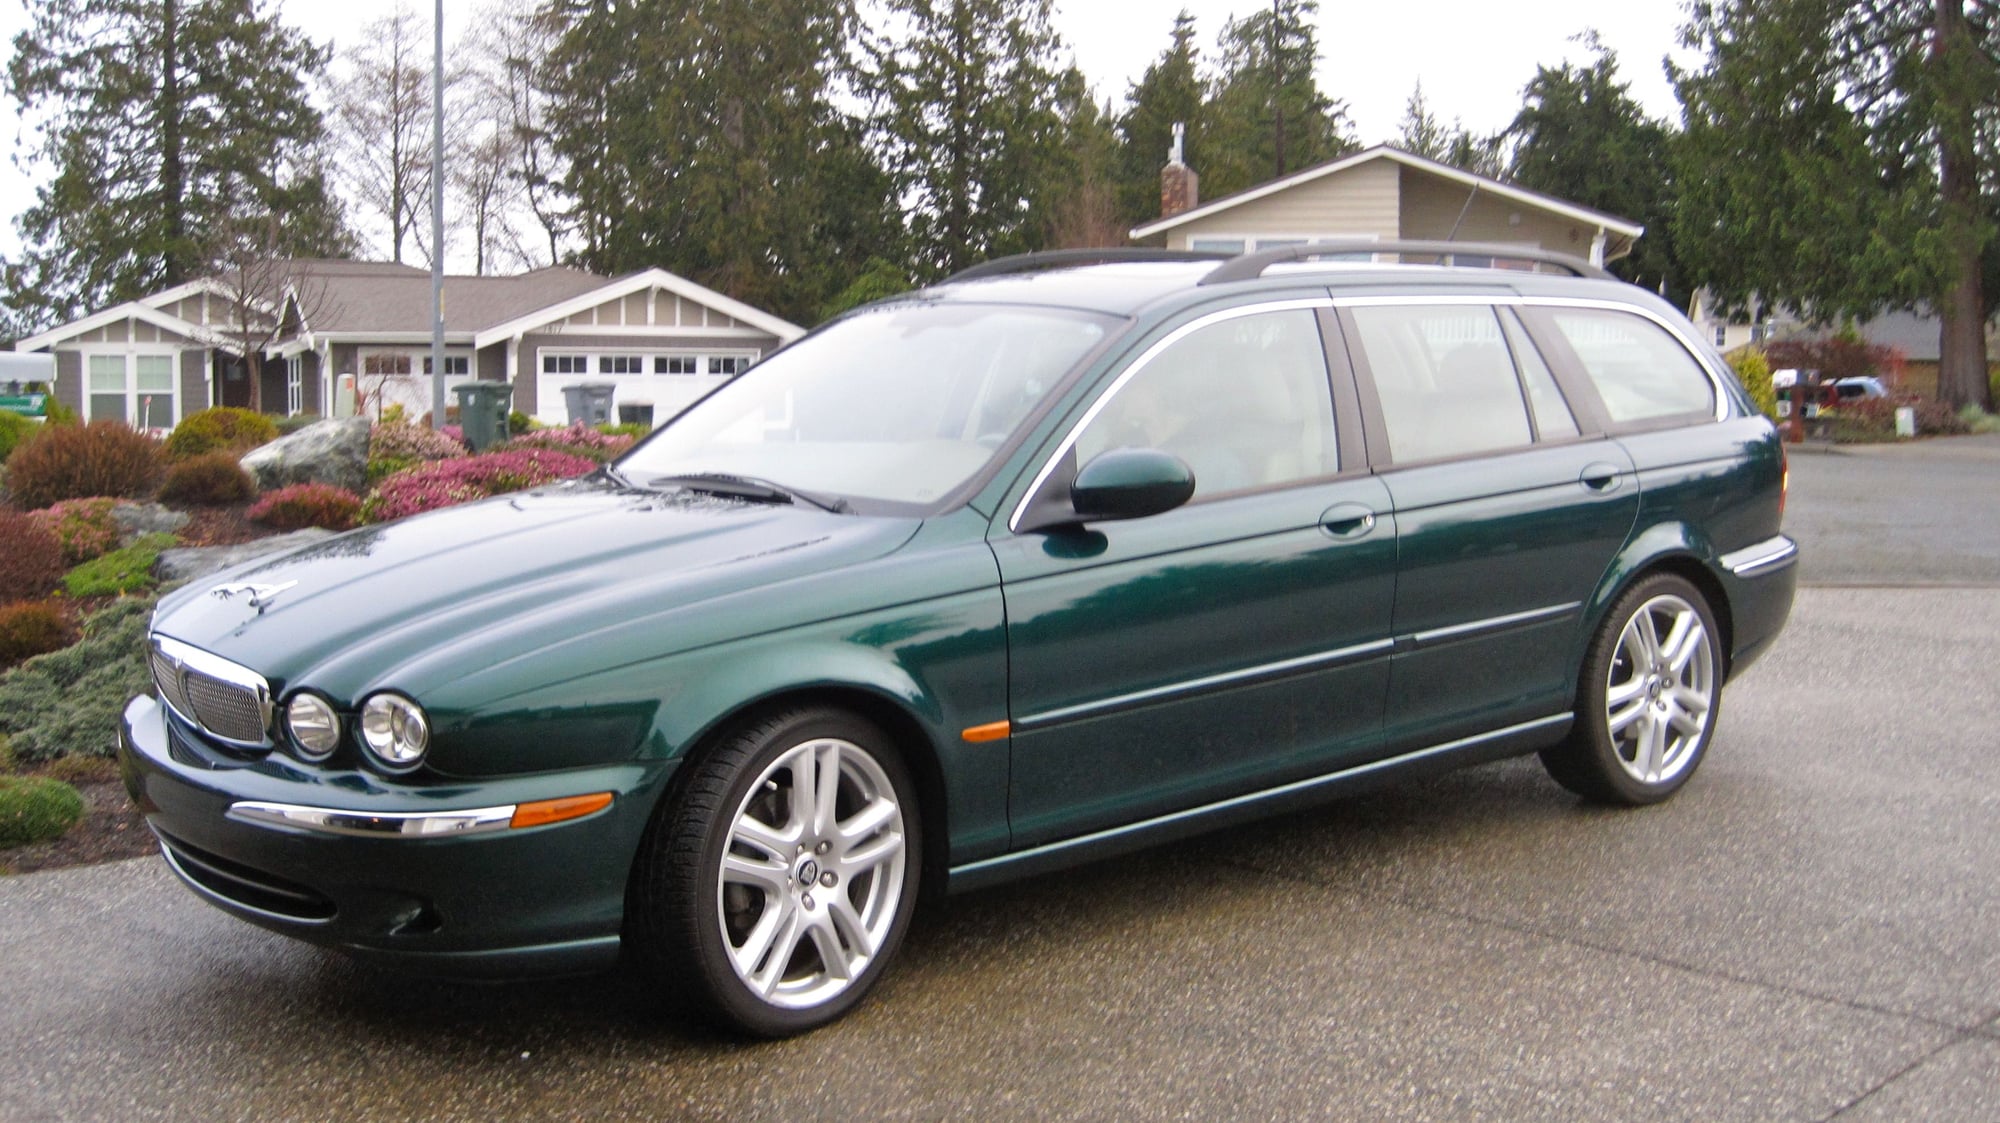 Wheels and Tires/Axles - Set of wheels from 2007 X-Type - Used - 2003 to 2008 Jaguar X-Type - Anacortes, WA 98221, United States